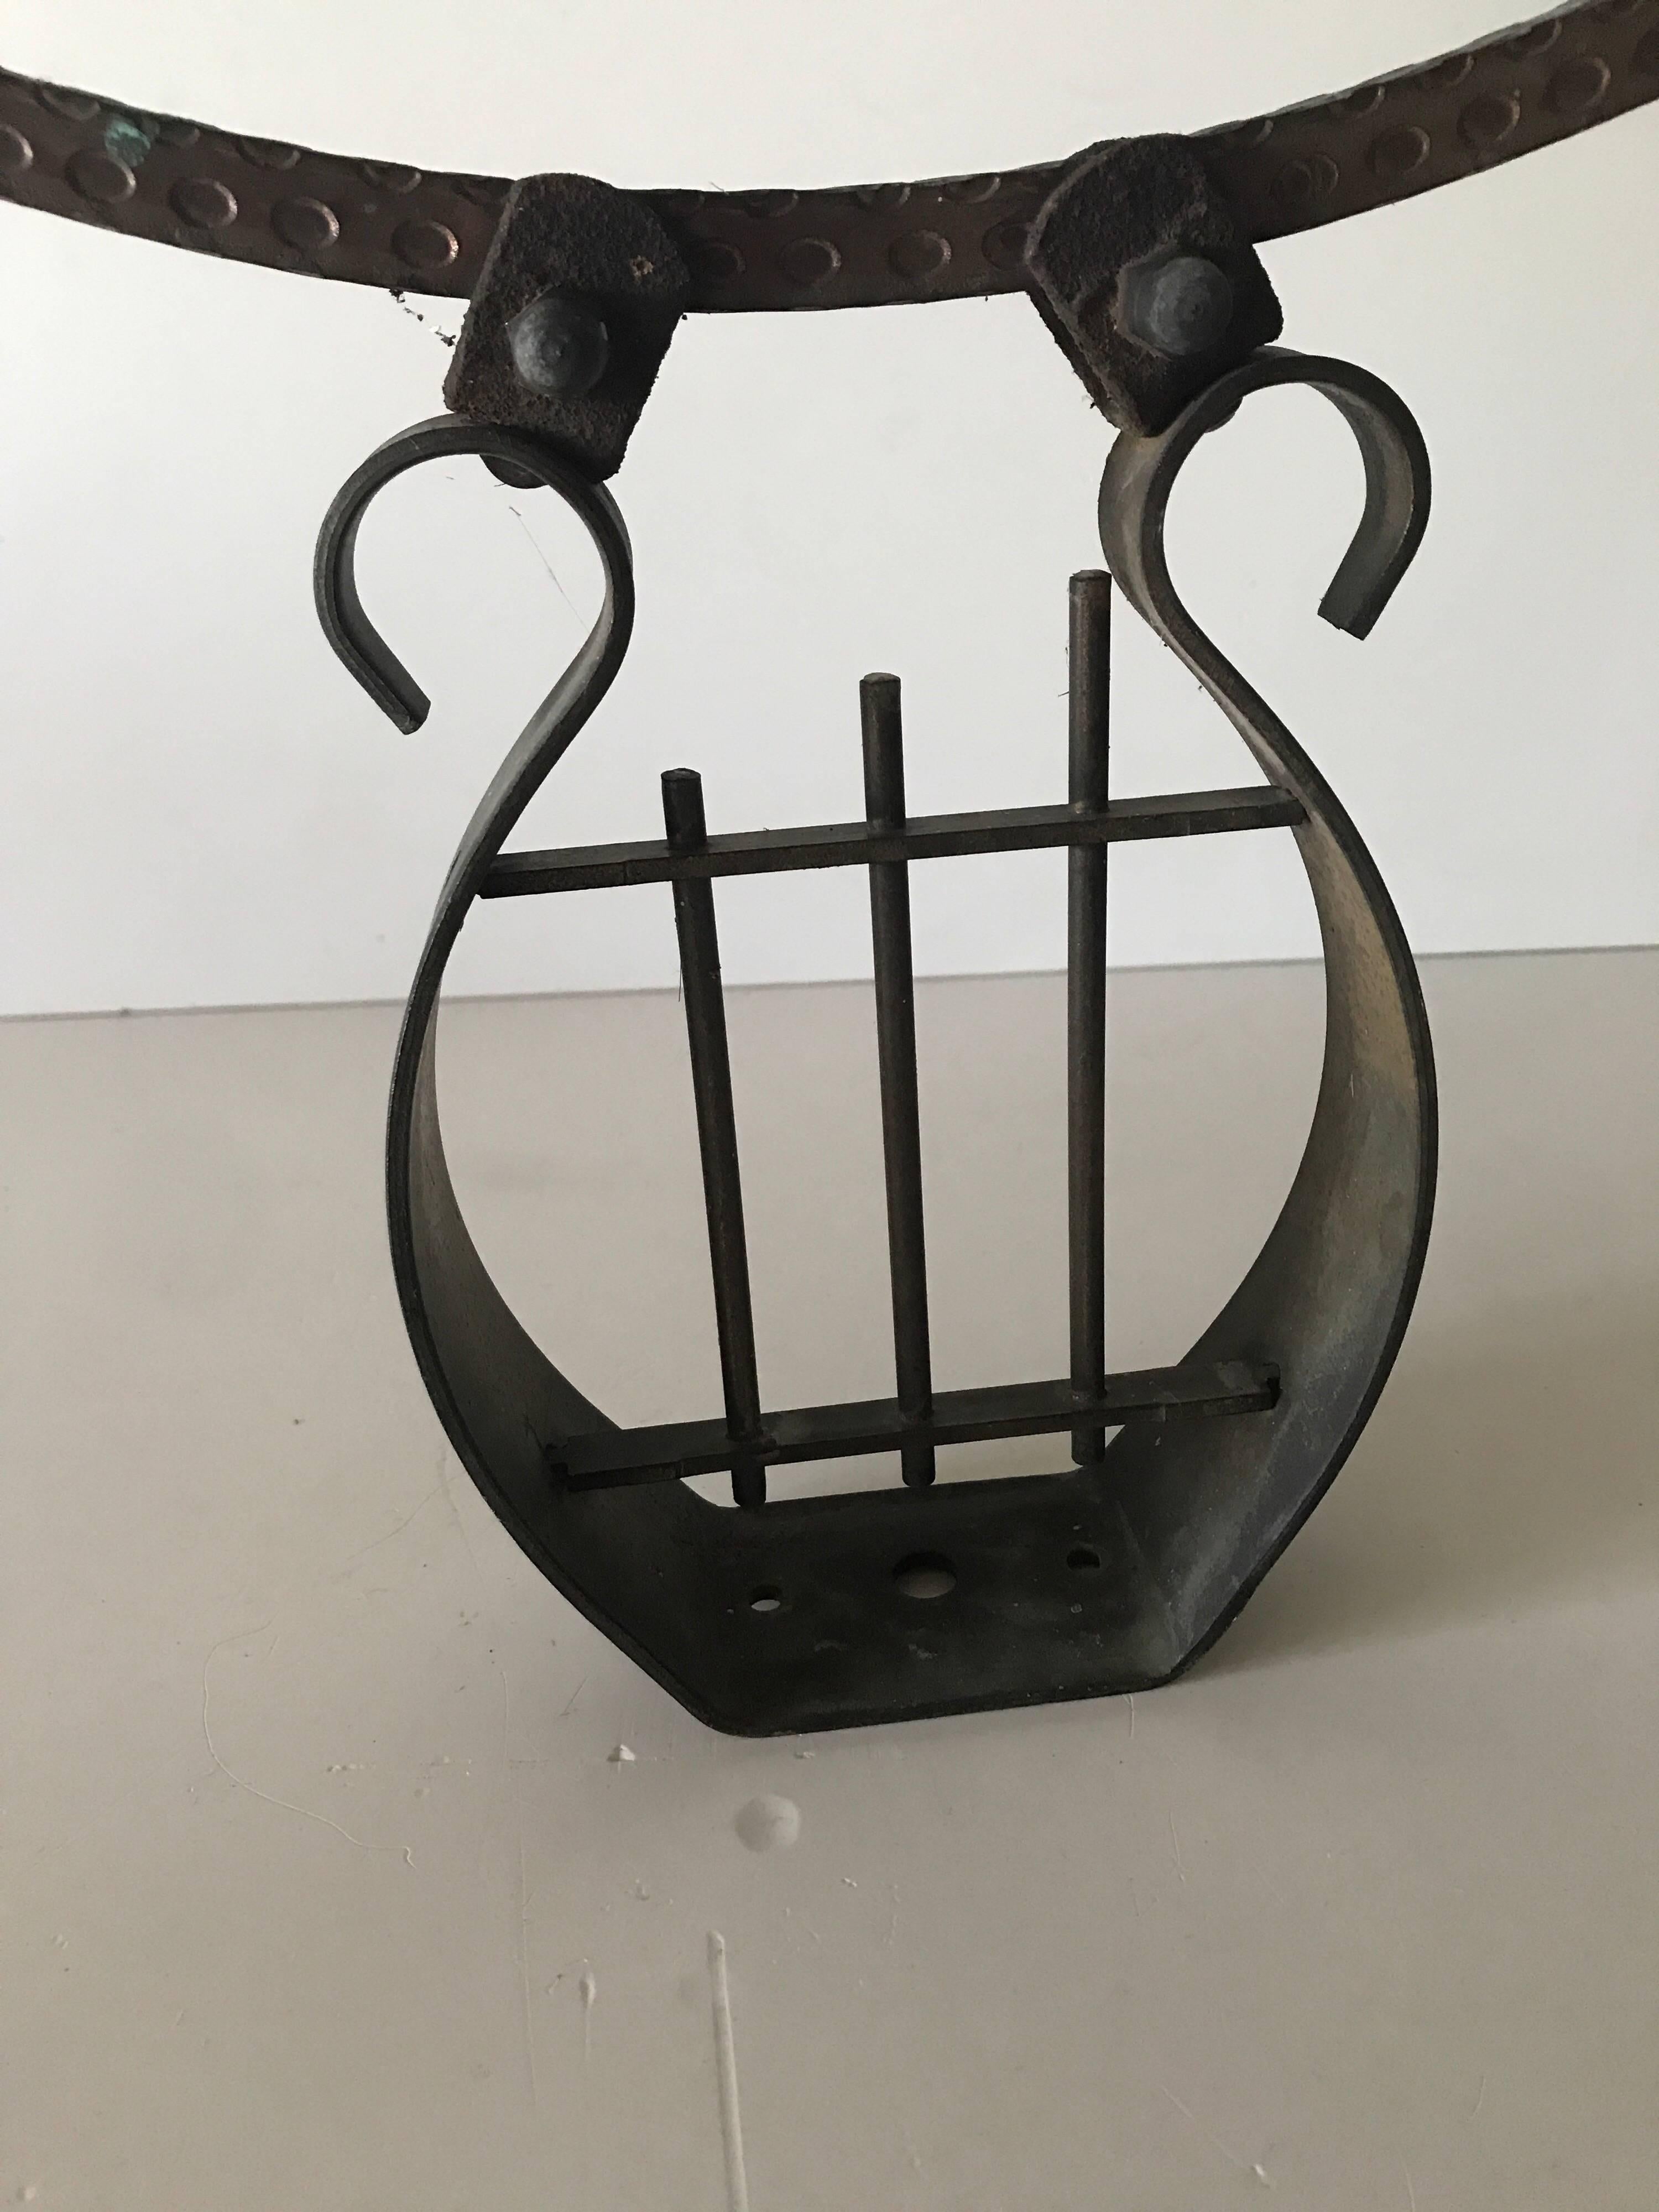 Large Swedish copper garden sundial, 1960.
This garden sundial is slightly larger in size than the other sundials that we have for sale. It is in a very nice condition without any damages or restorations. The dimensions are 77 cm in total height